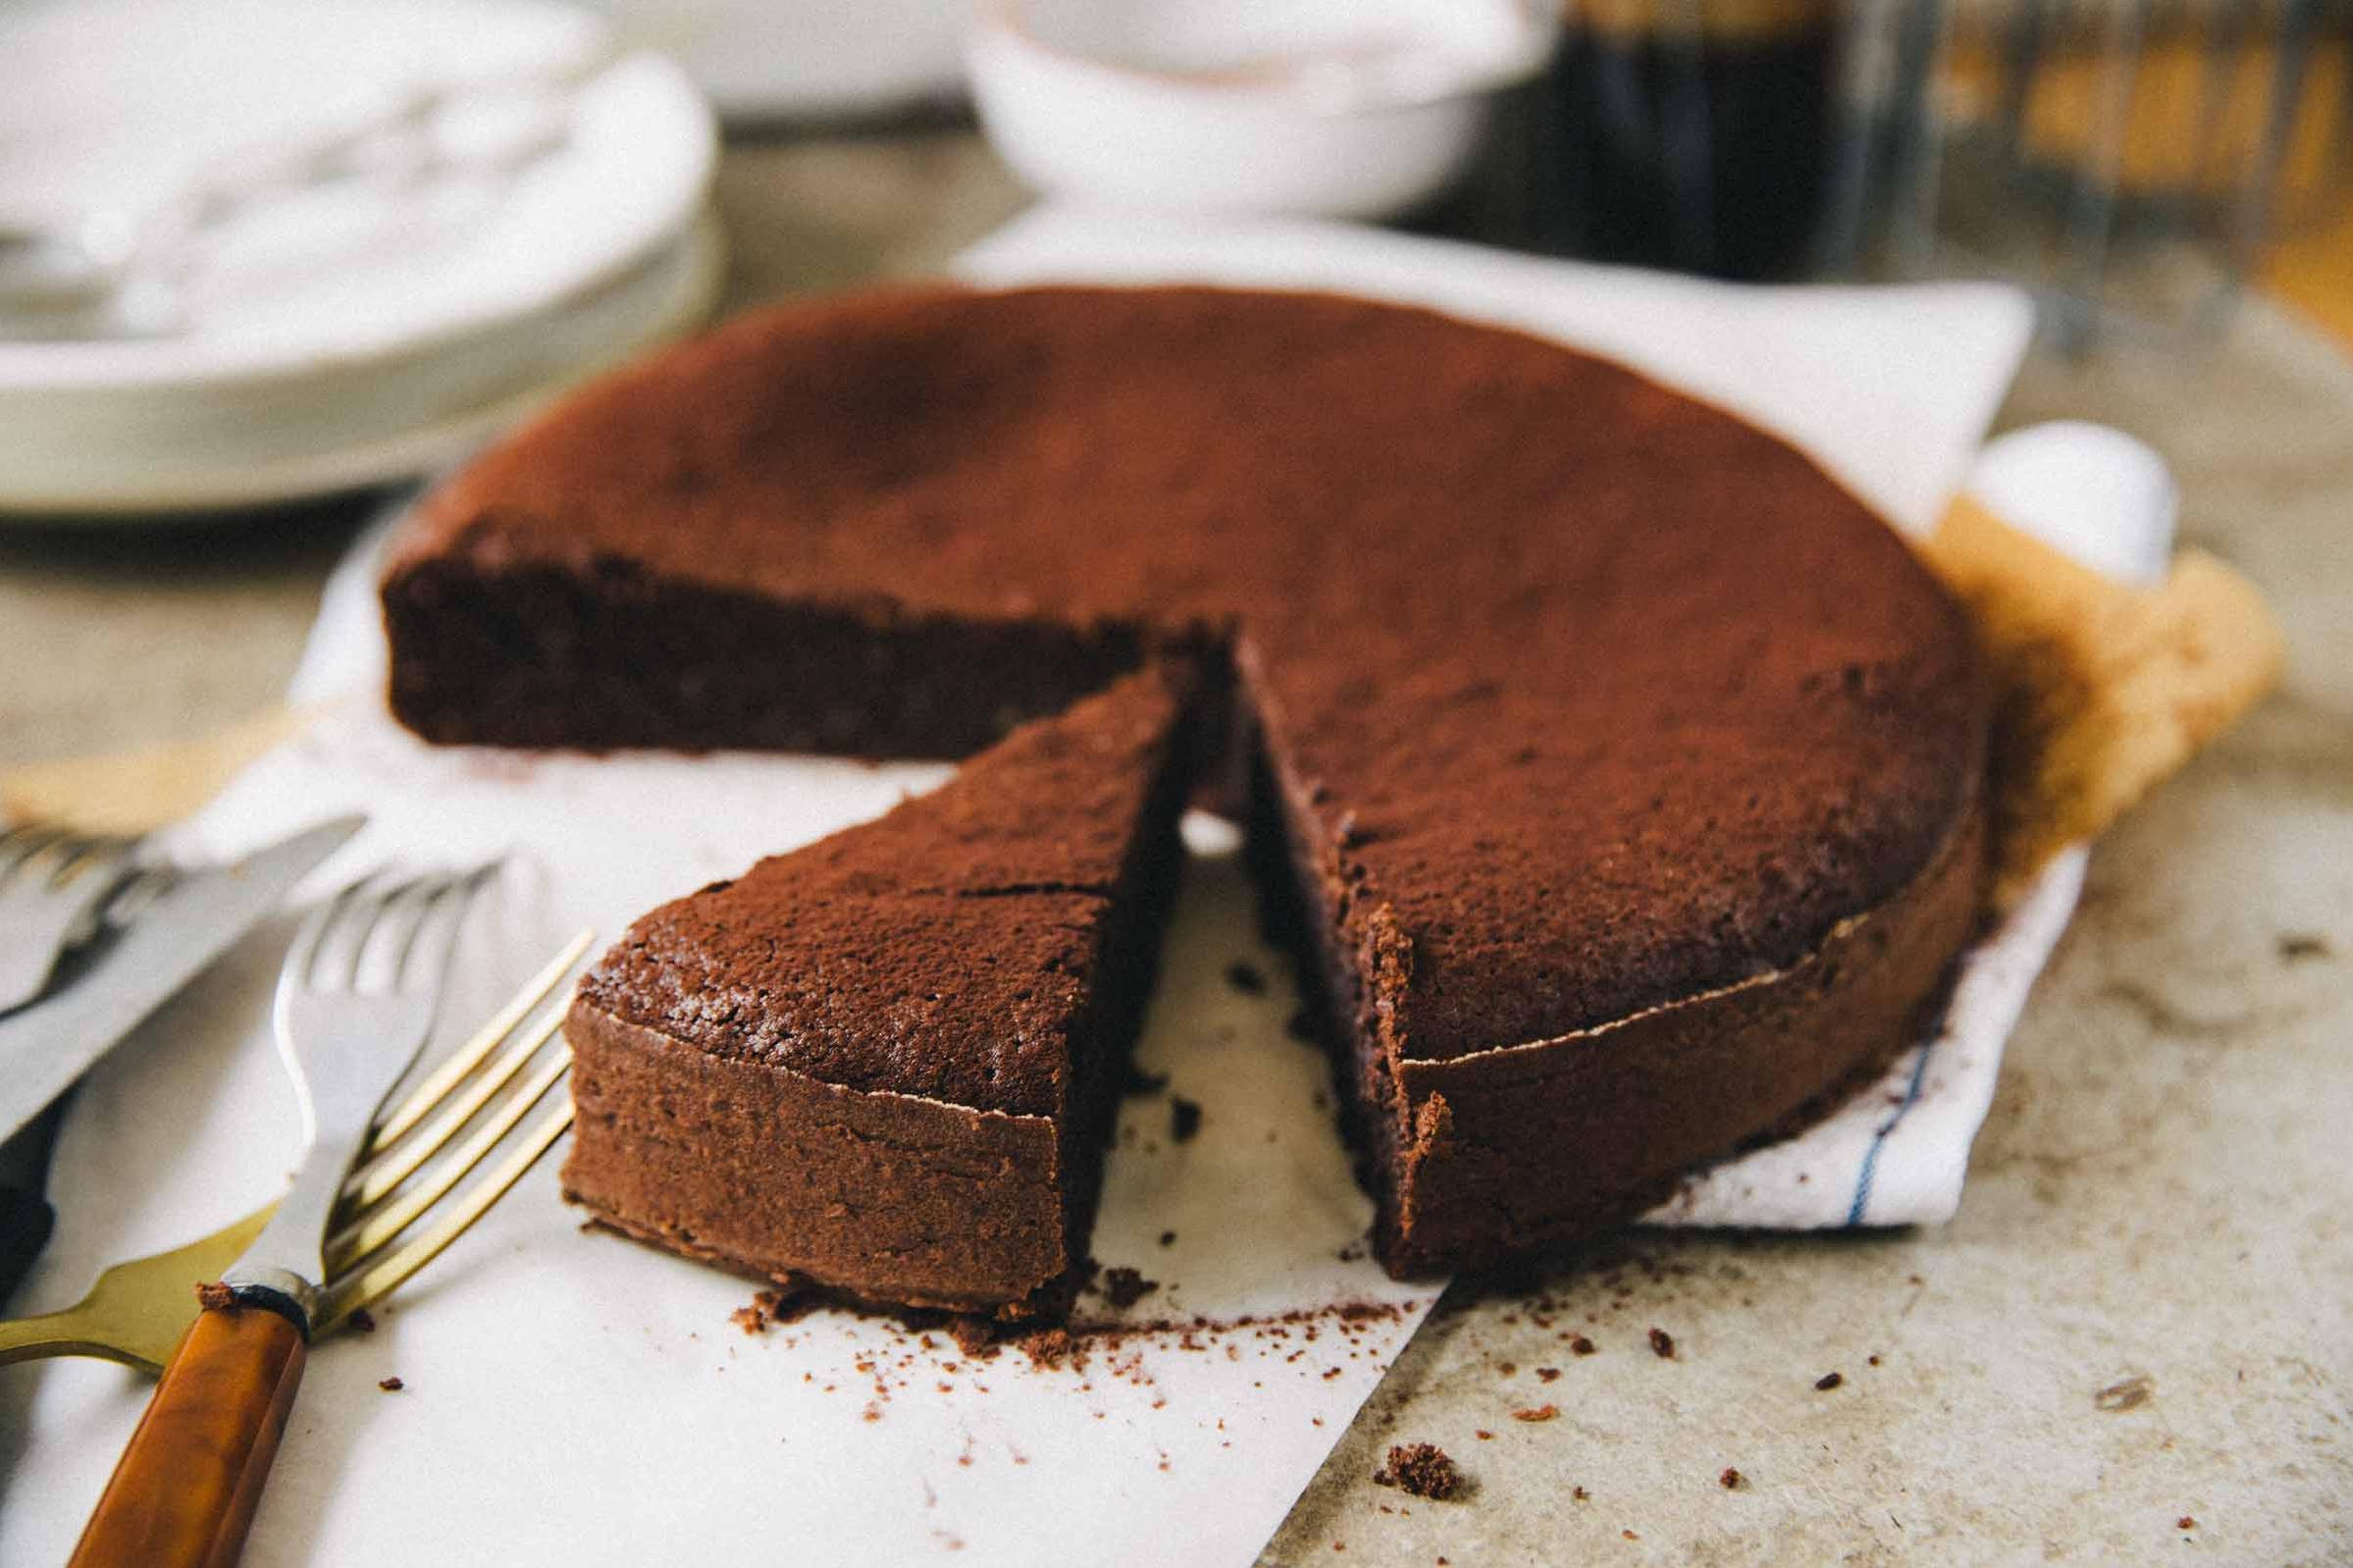  This cake is a chocoholic's dream come true.